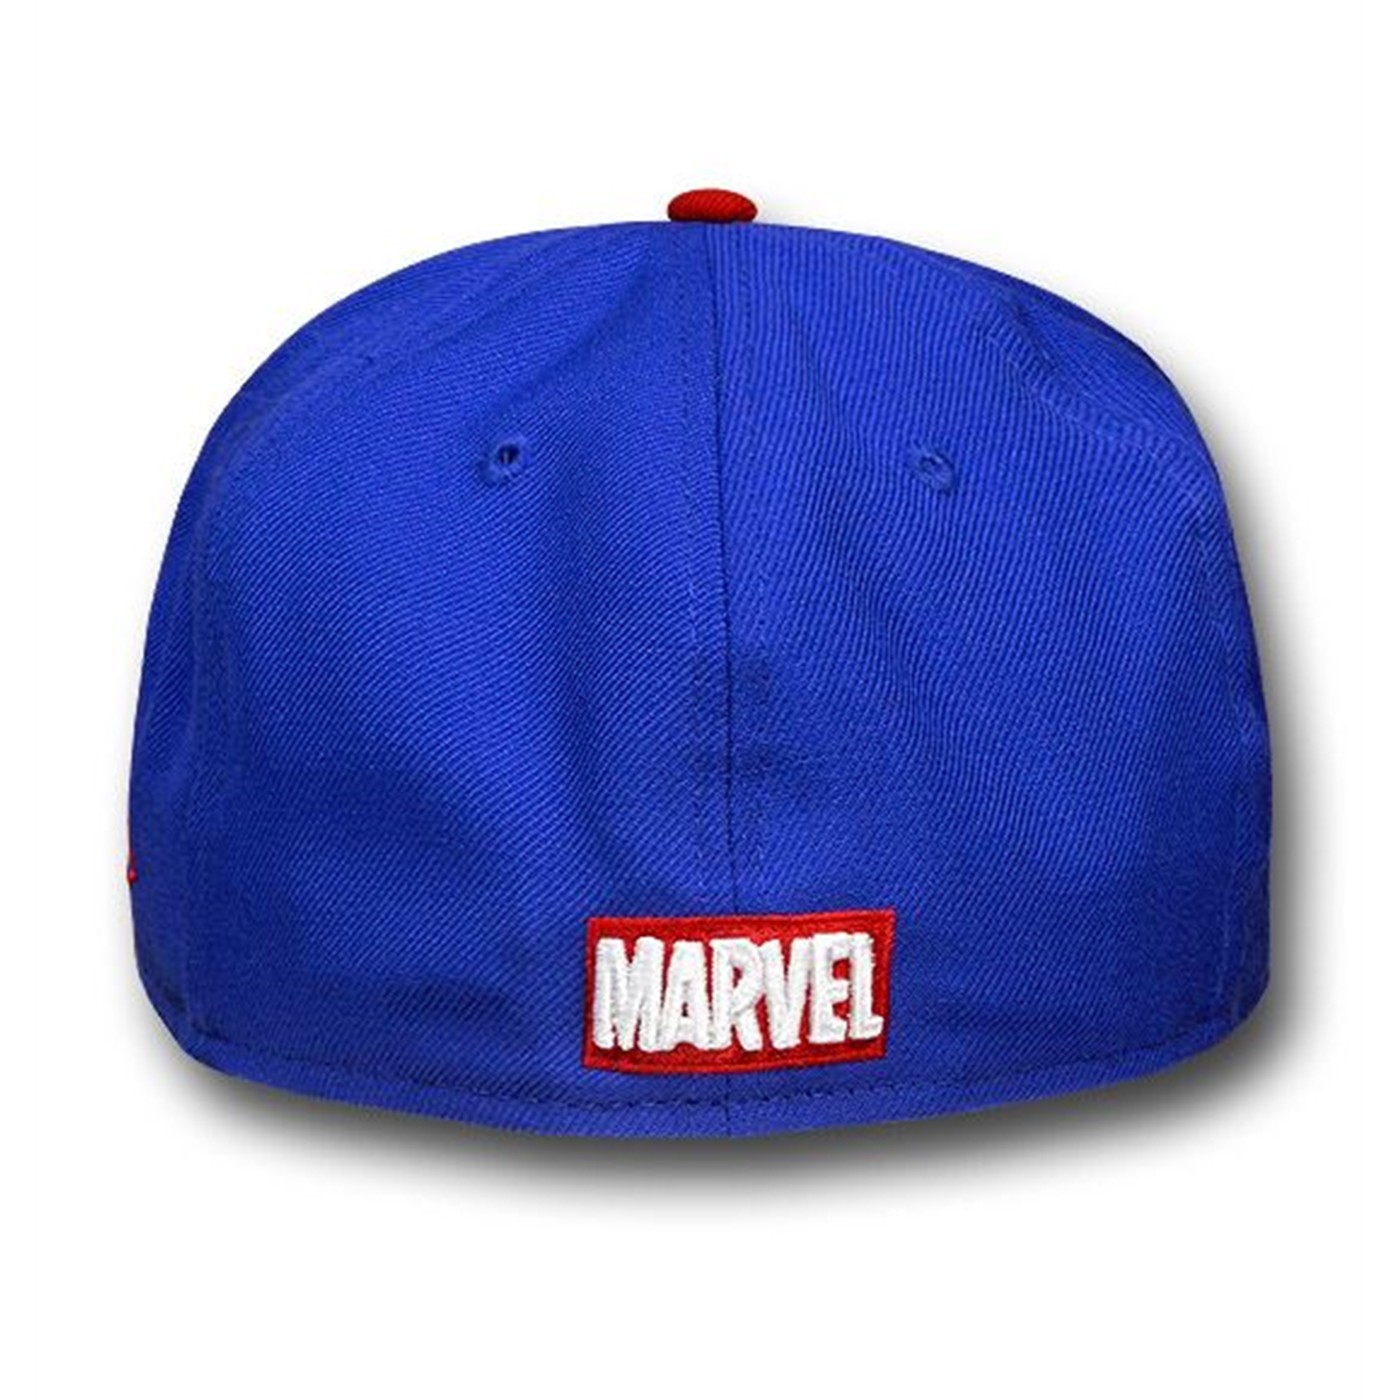 Captain America Side Image Flat Bill 59Fifty Cap